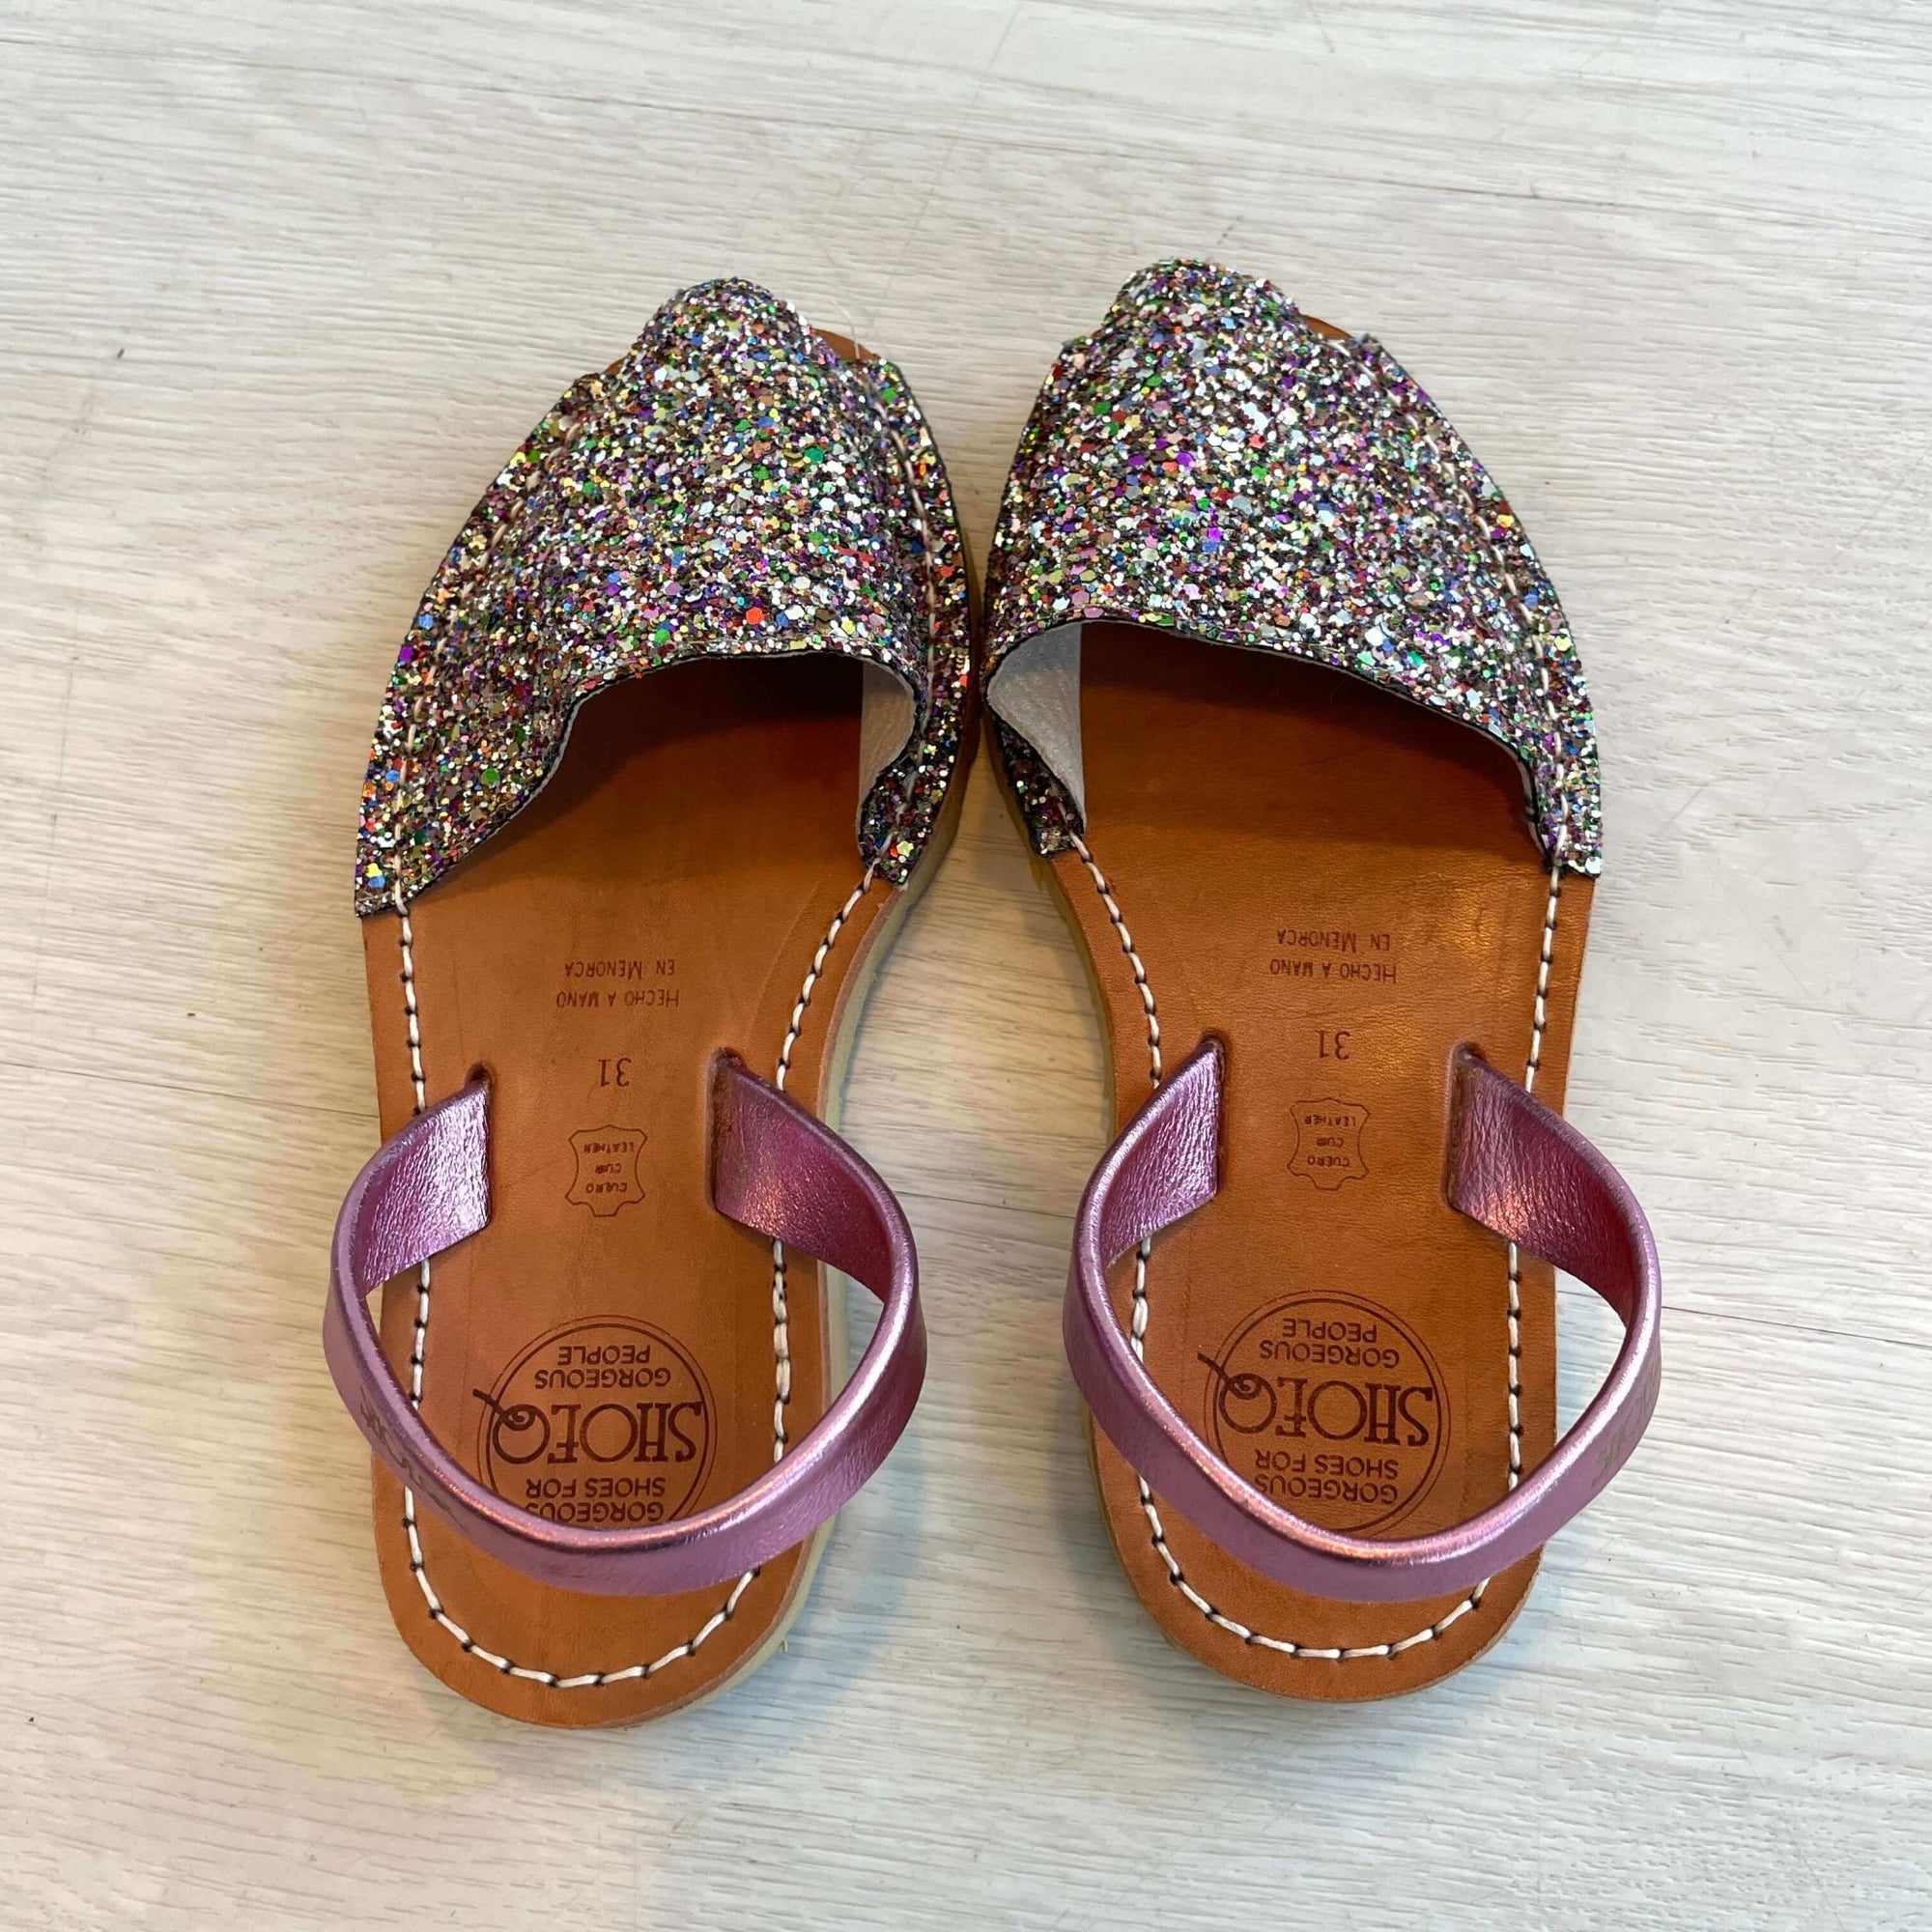 DS - Girls Classic Avarca in Rainbow Pink Glitter - outlet item - Shoeq